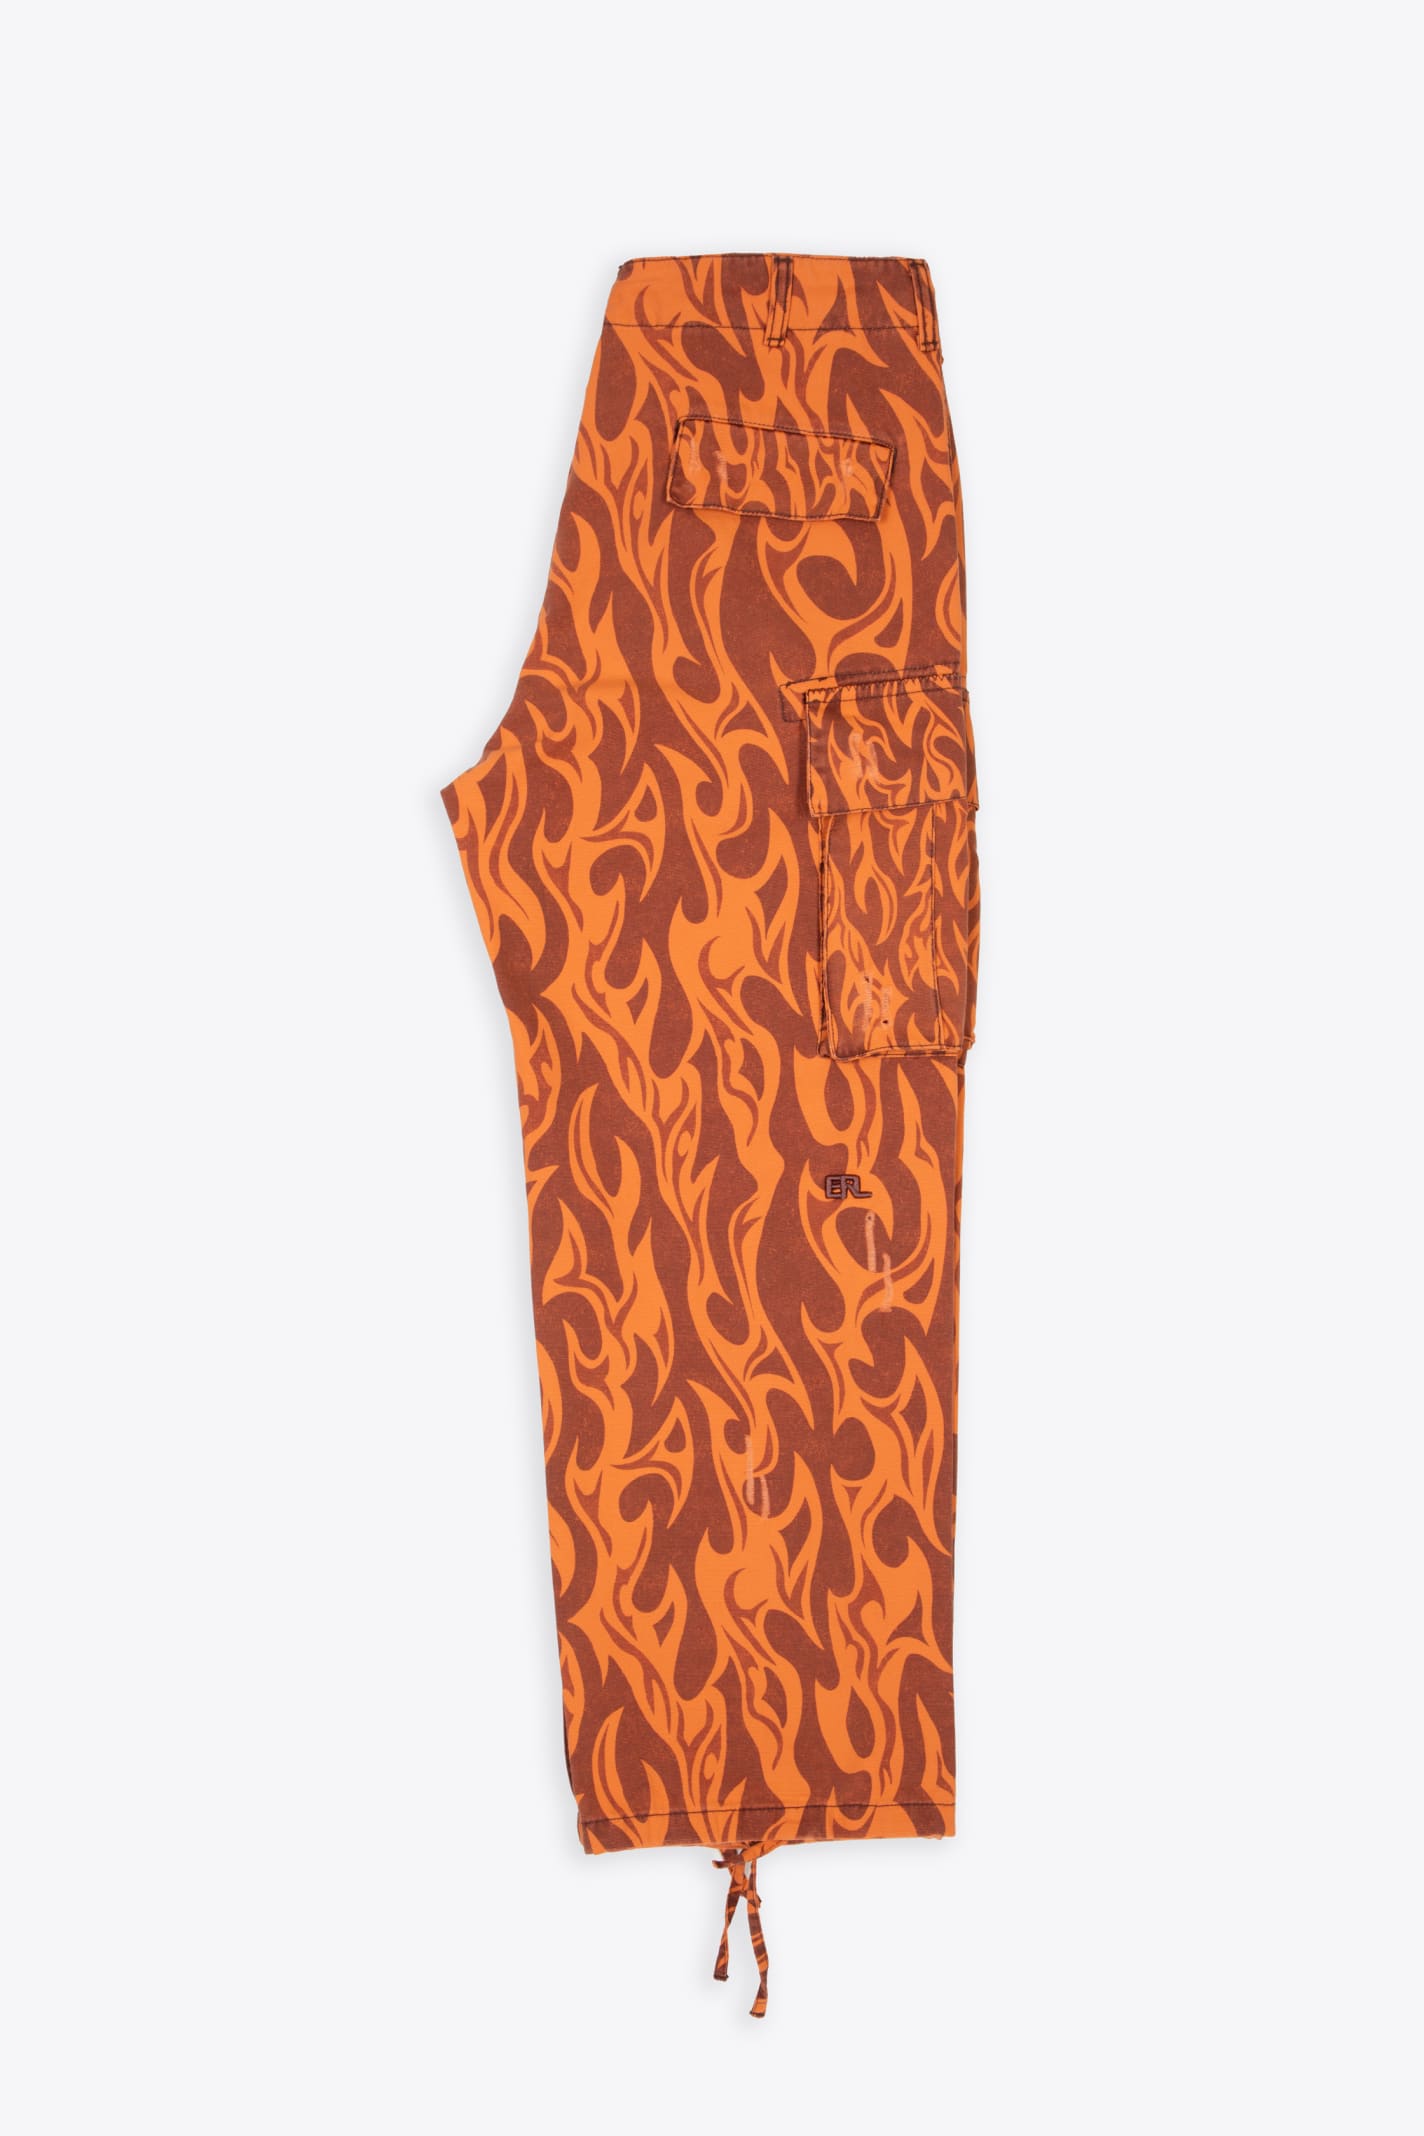 Shop Erl Unisex Printed Cargo Pants Woven Orange Canvas Printed Cargo Pant - Unisex Printed Cargo Pants Woven In Arancione